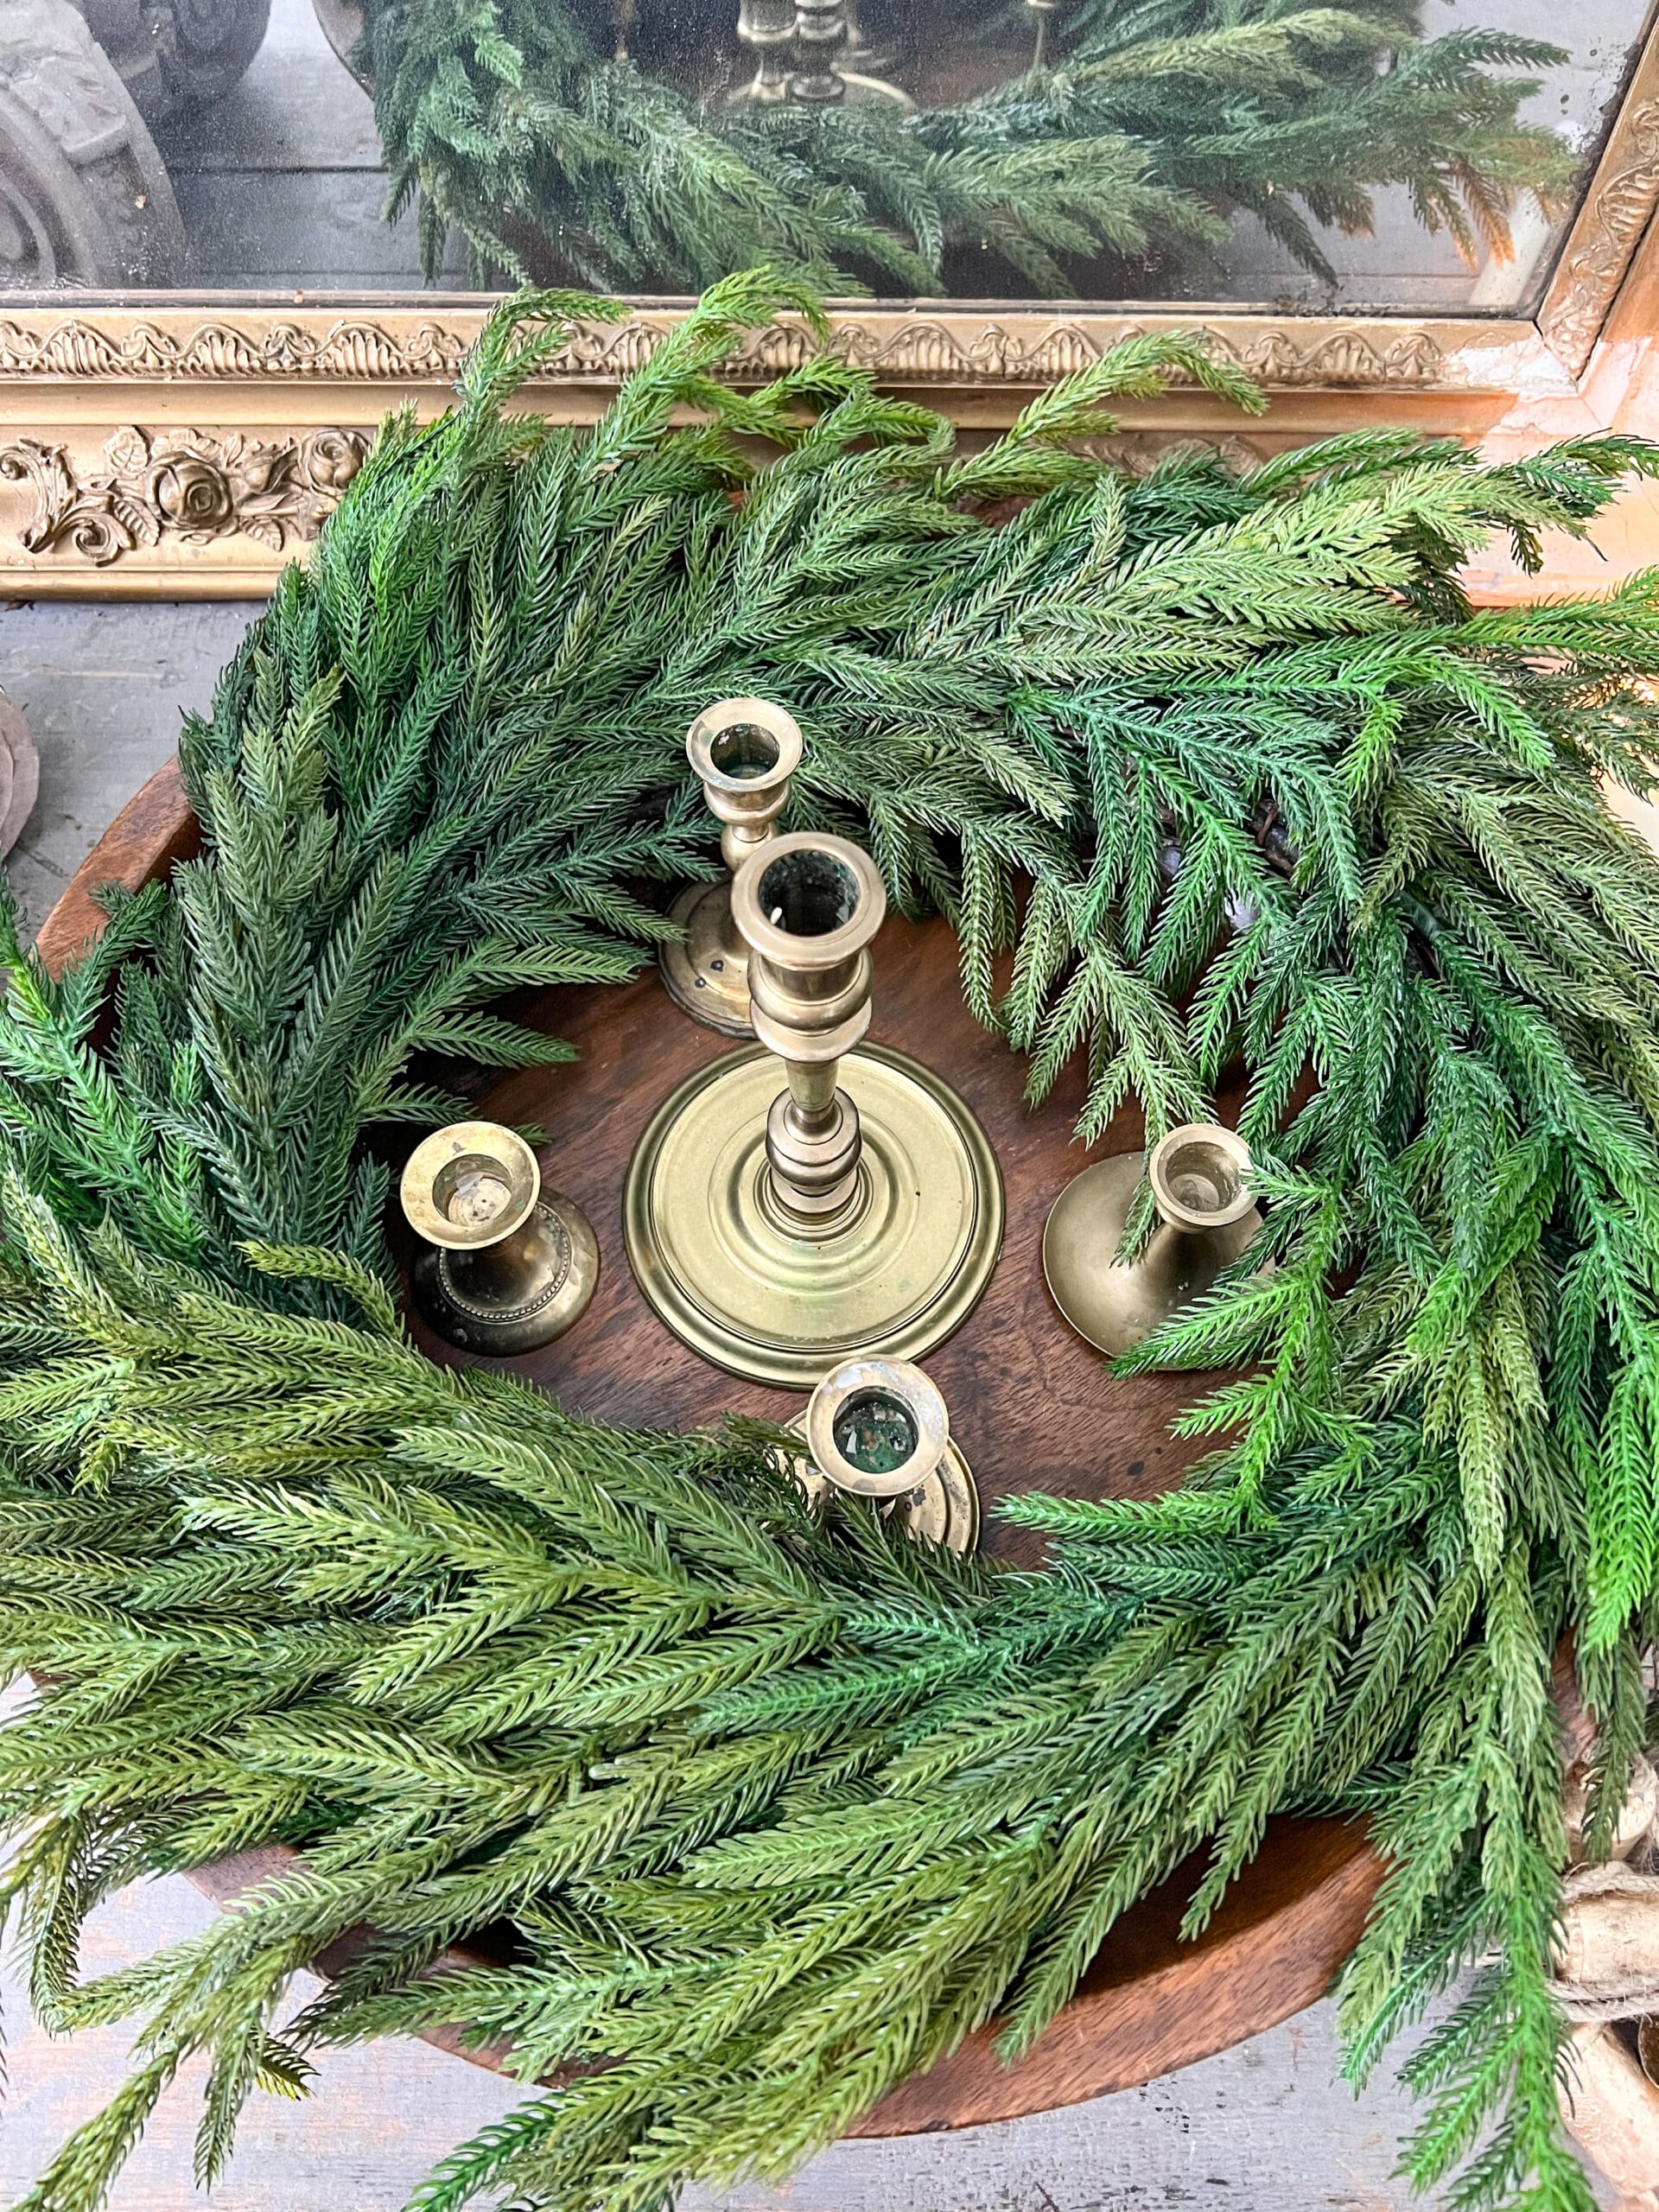 golden candlesticks at the bottom of the vessel surrounded by the wreath